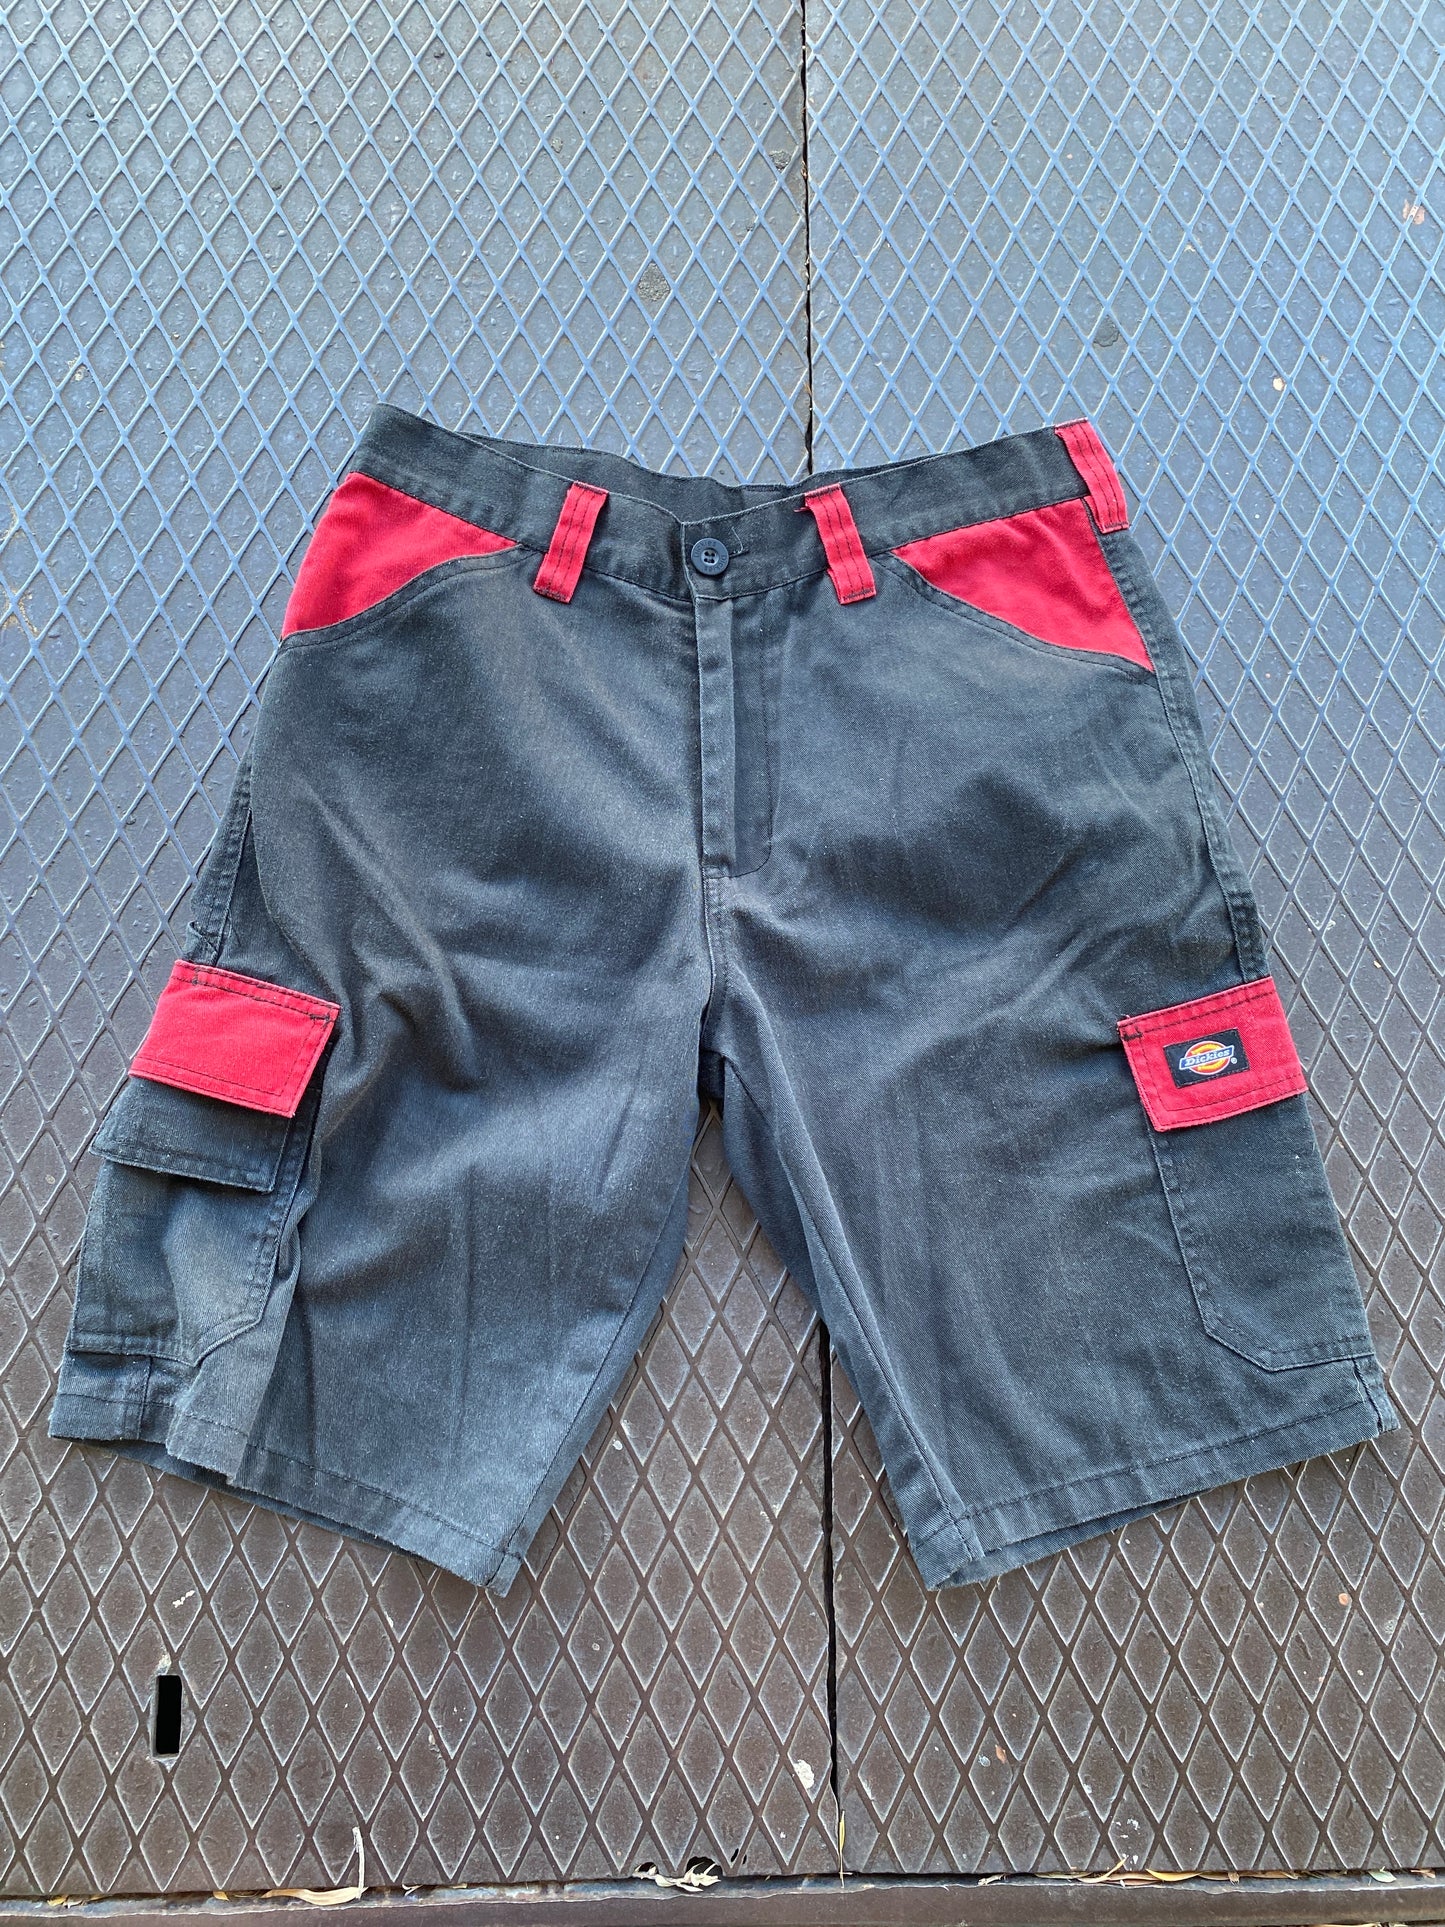 32 - Dickies Cargo Shorts Black/Red Accents